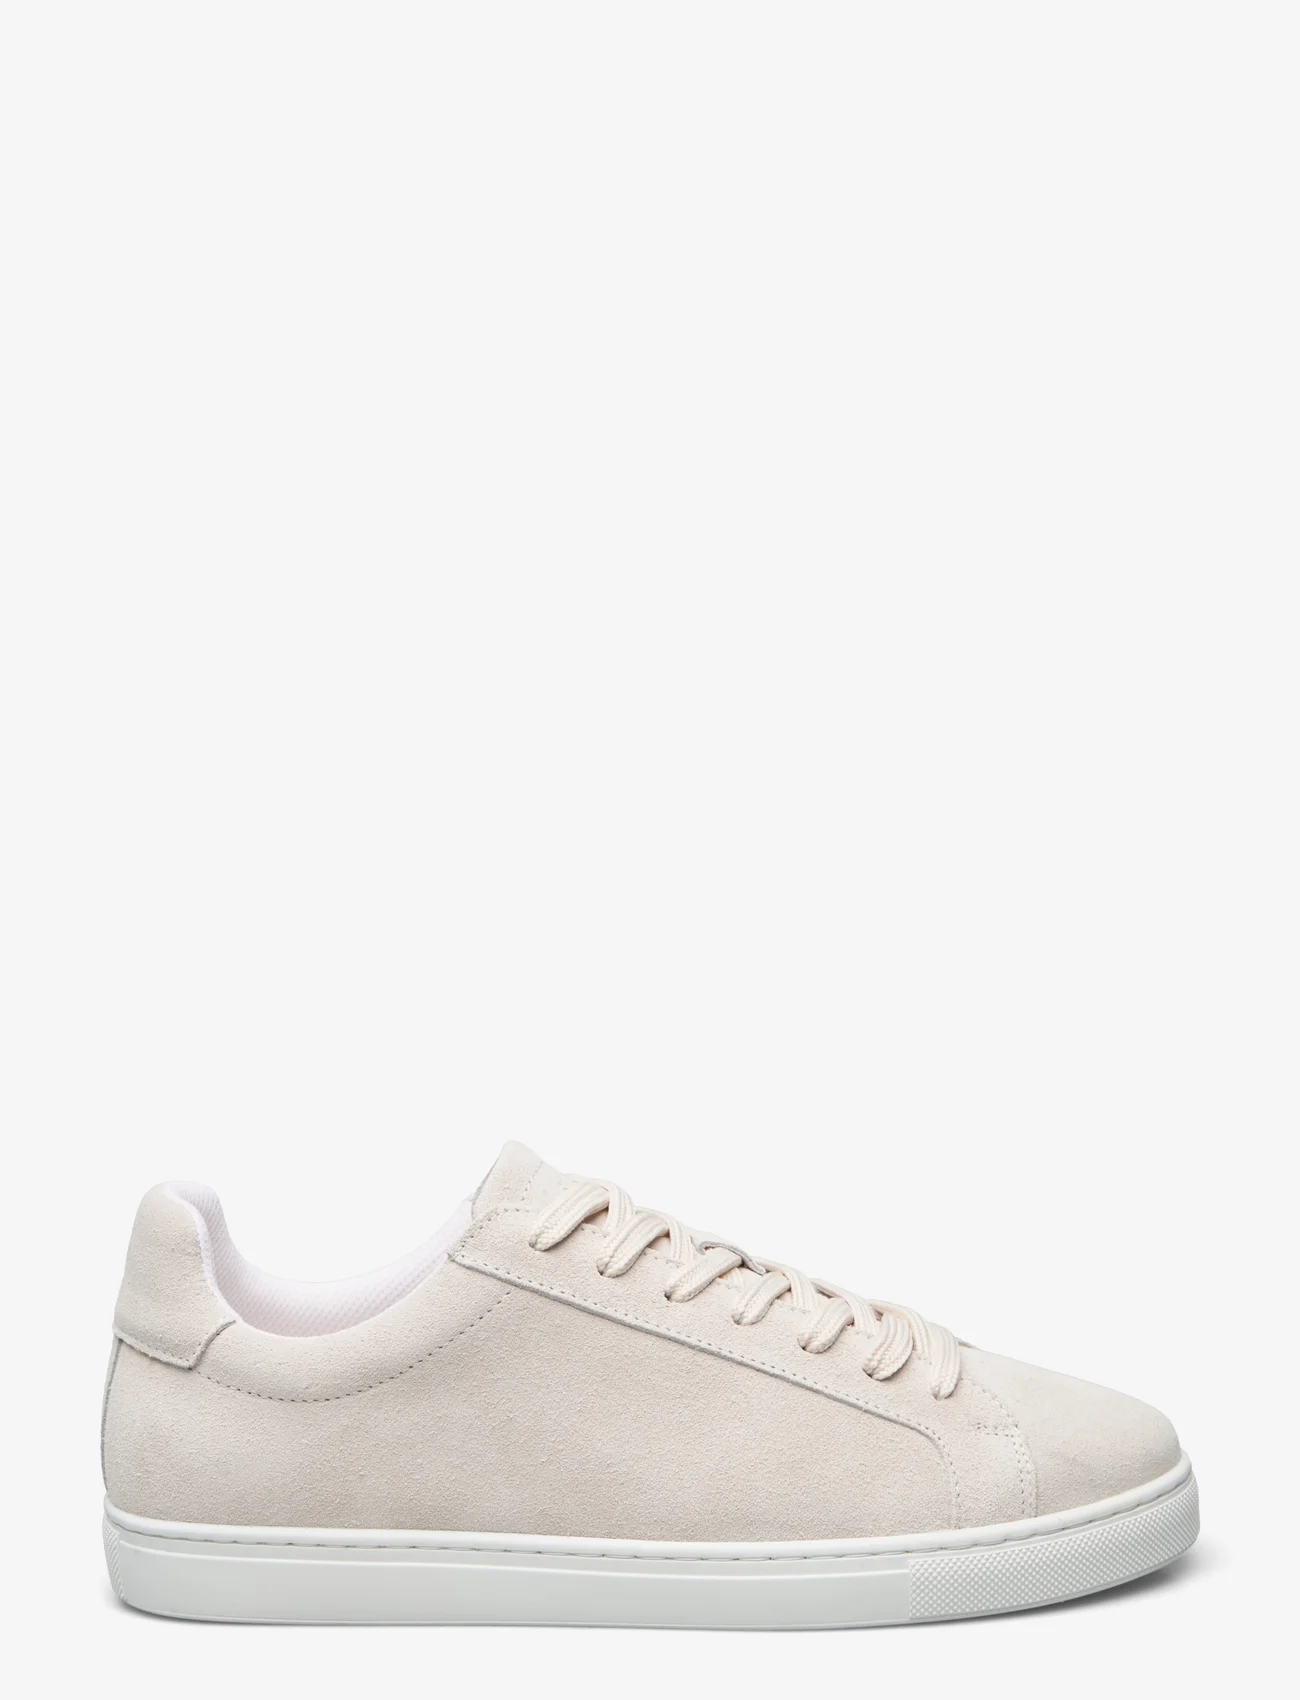 Selected Homme - SLHEVAN NEW SUEDE SNEAKER - laag sneakers - white - 1